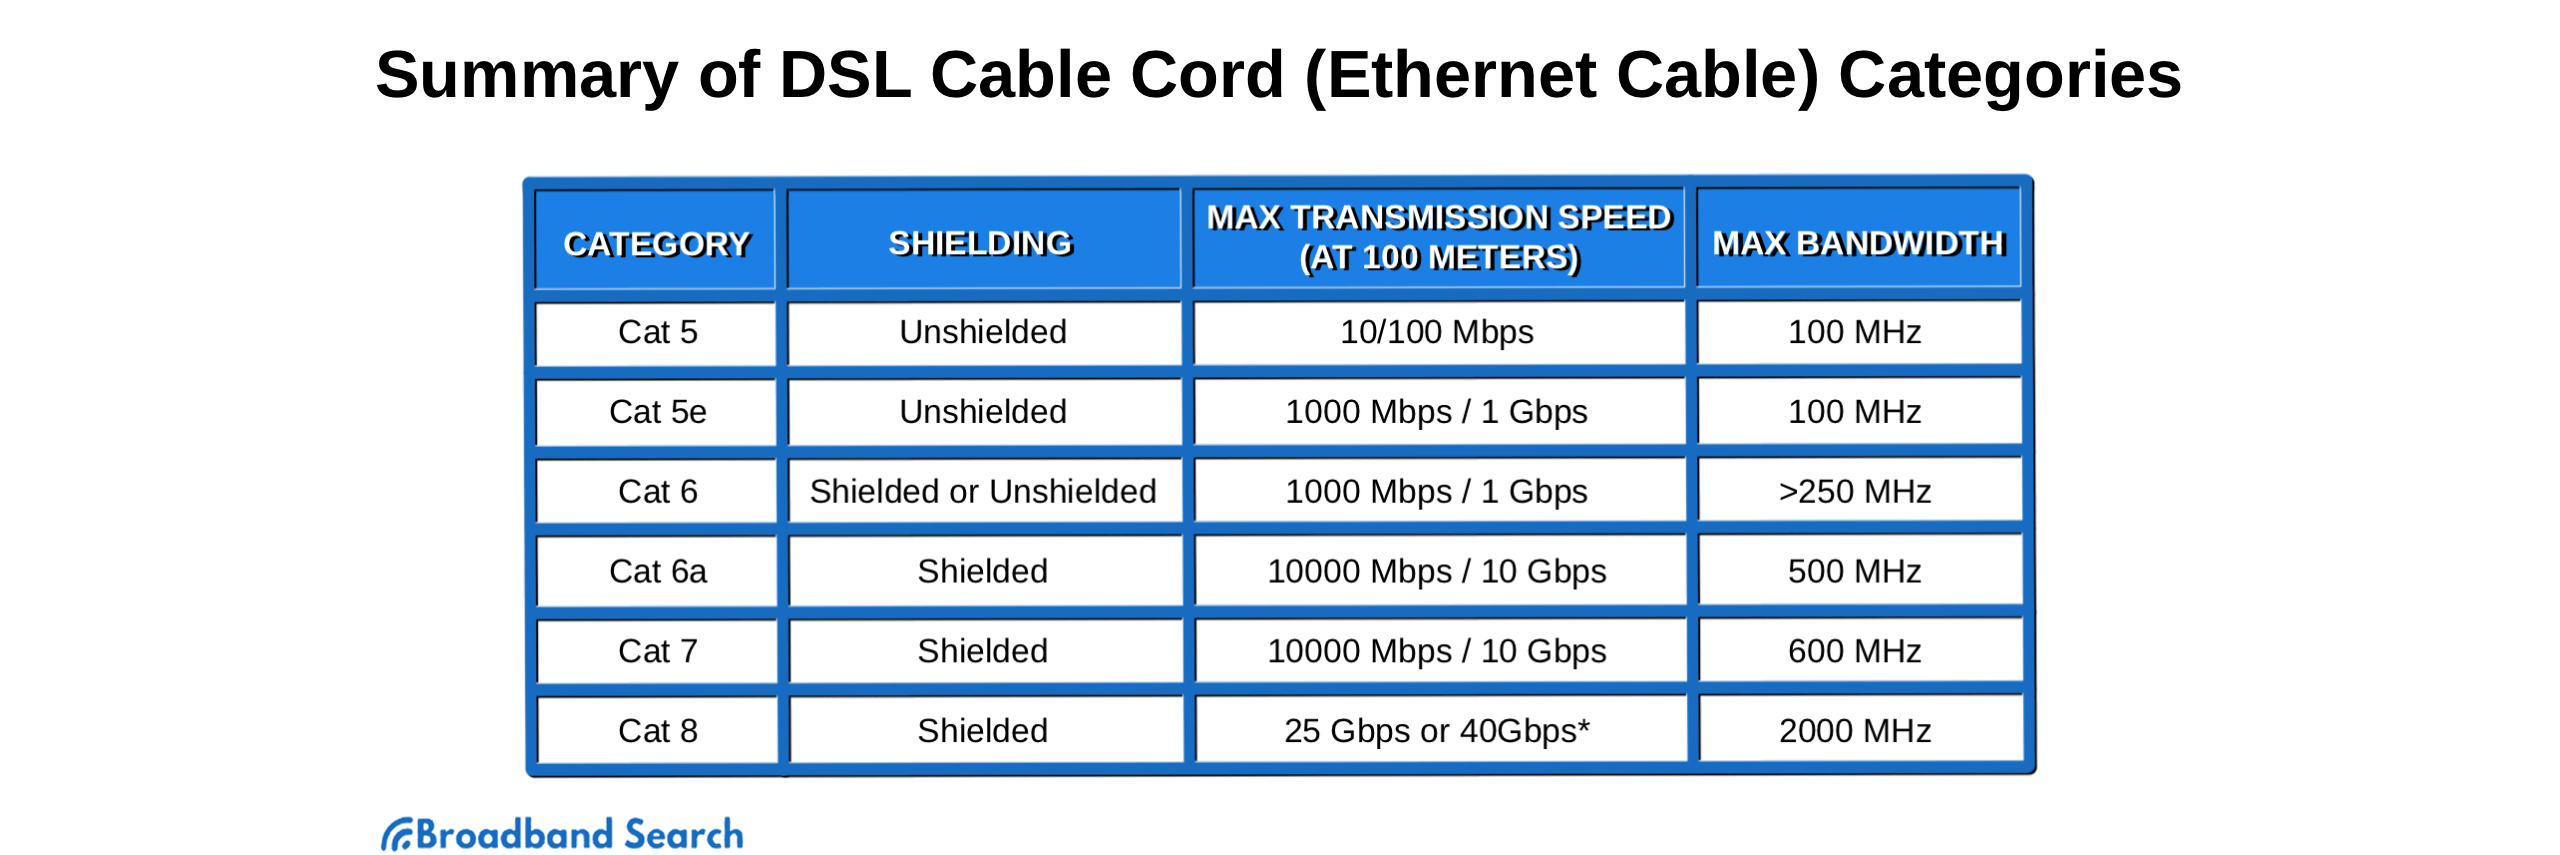 How to Choose a DSL Cable Cord